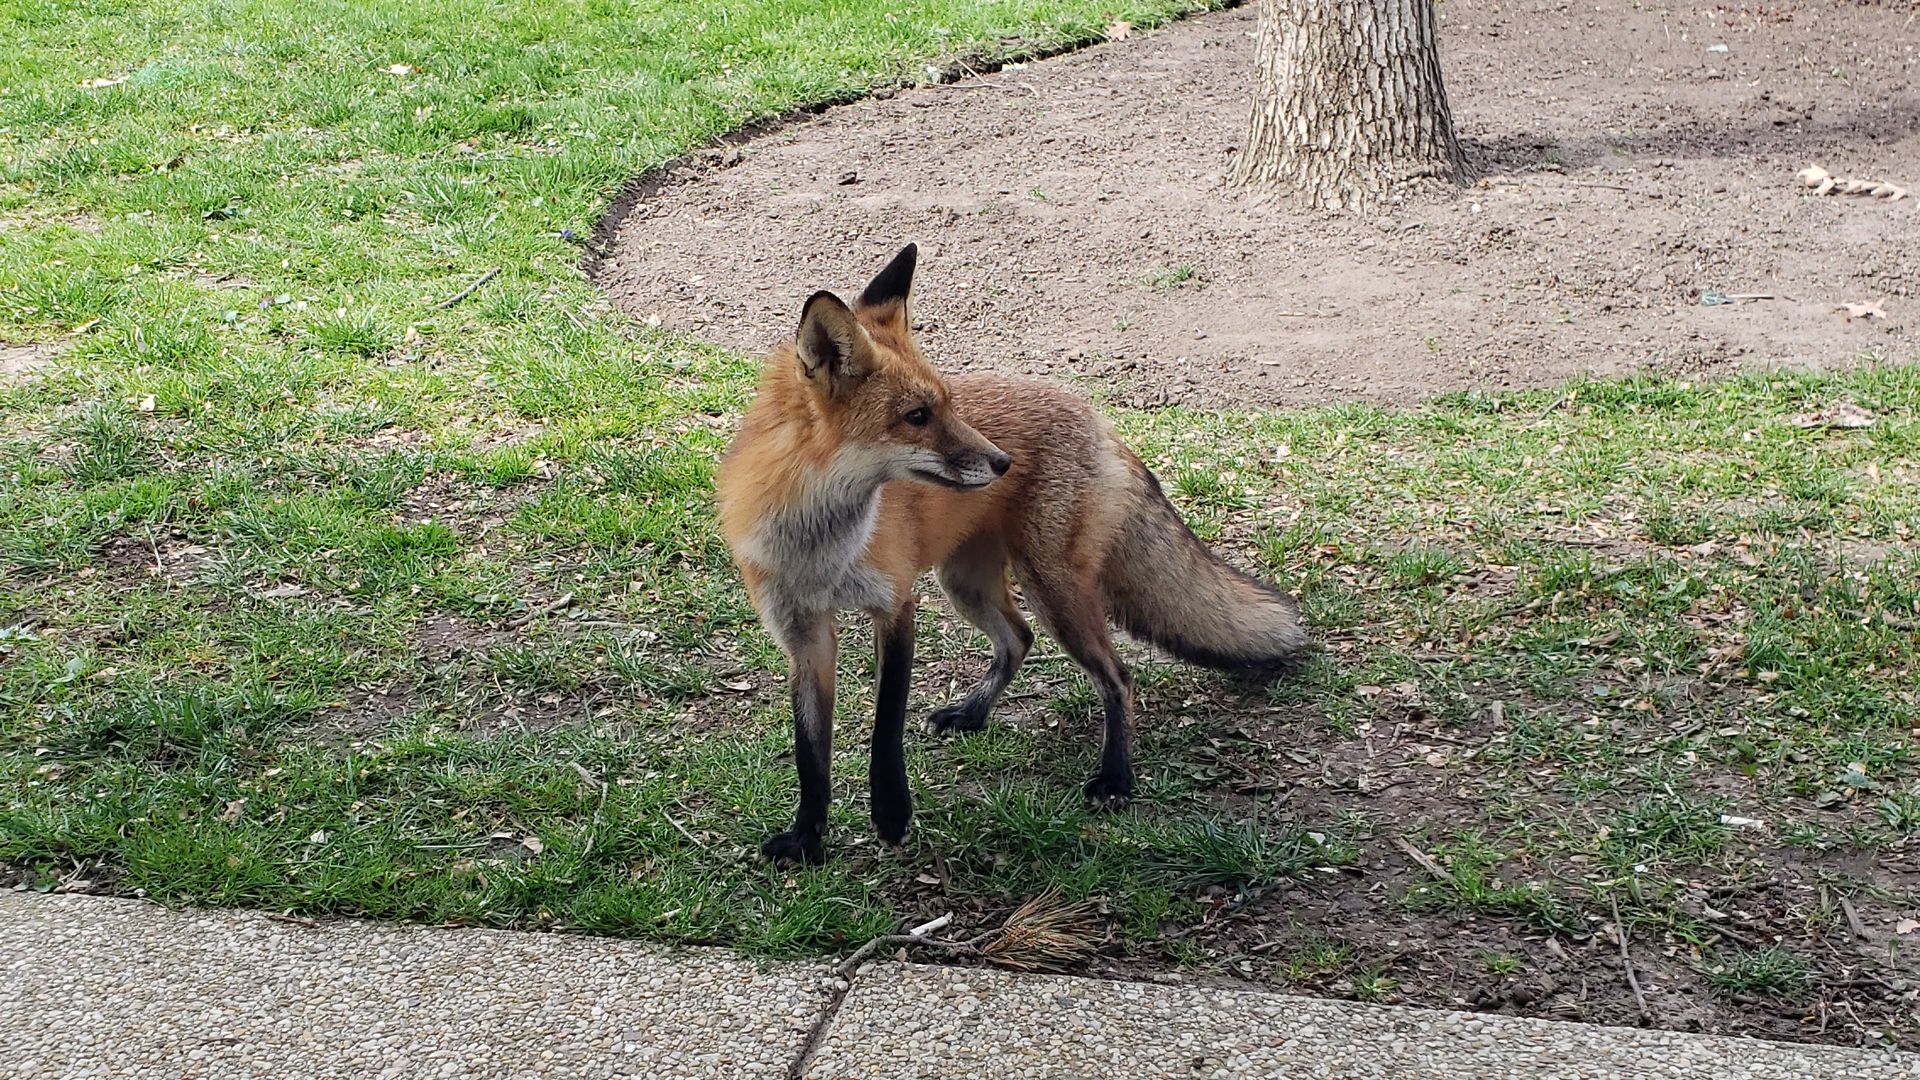 A red fox near the Capitol.